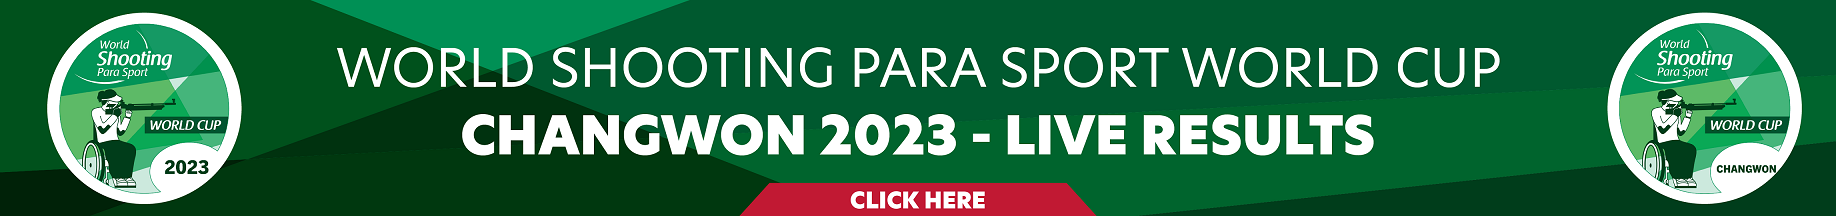 A banner about the Changwon 2023 Shooting Para Sport World Cup 